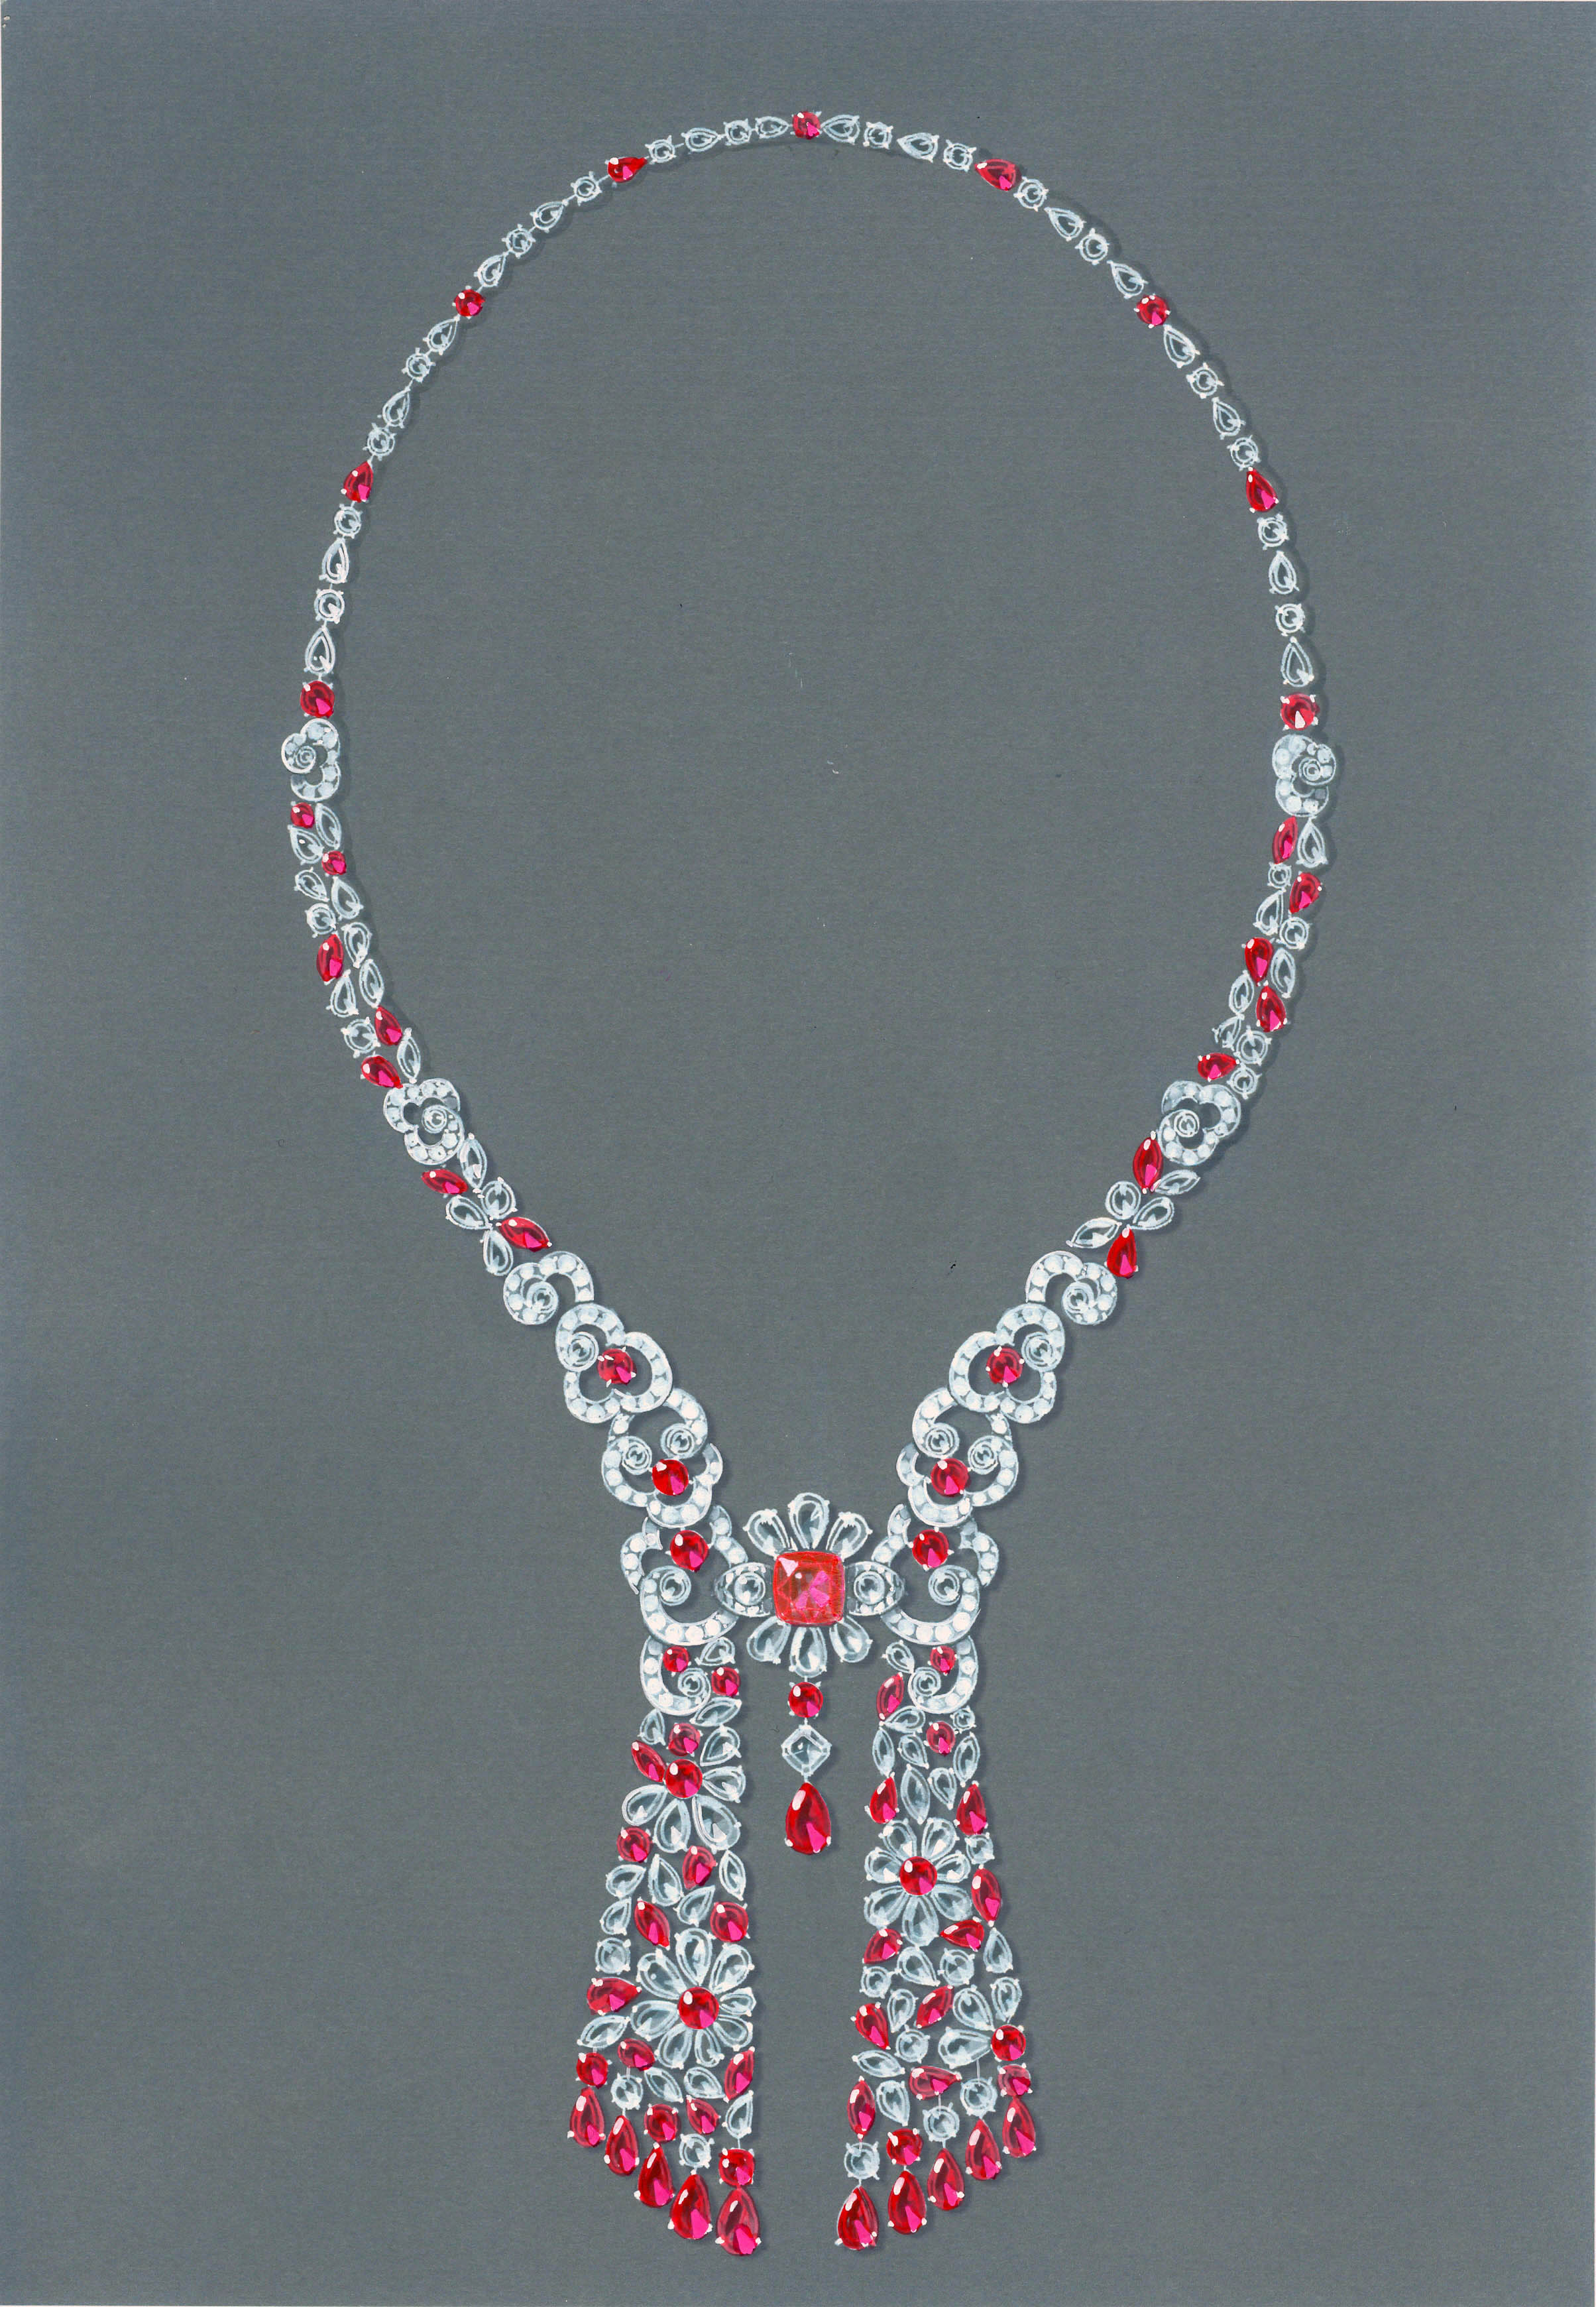 This necklace made from pear-shaped, round and marquise Burmese rubies and white diamonds showcases a stunning floral centerpiece. Photo courtesy Graff Diamonds.